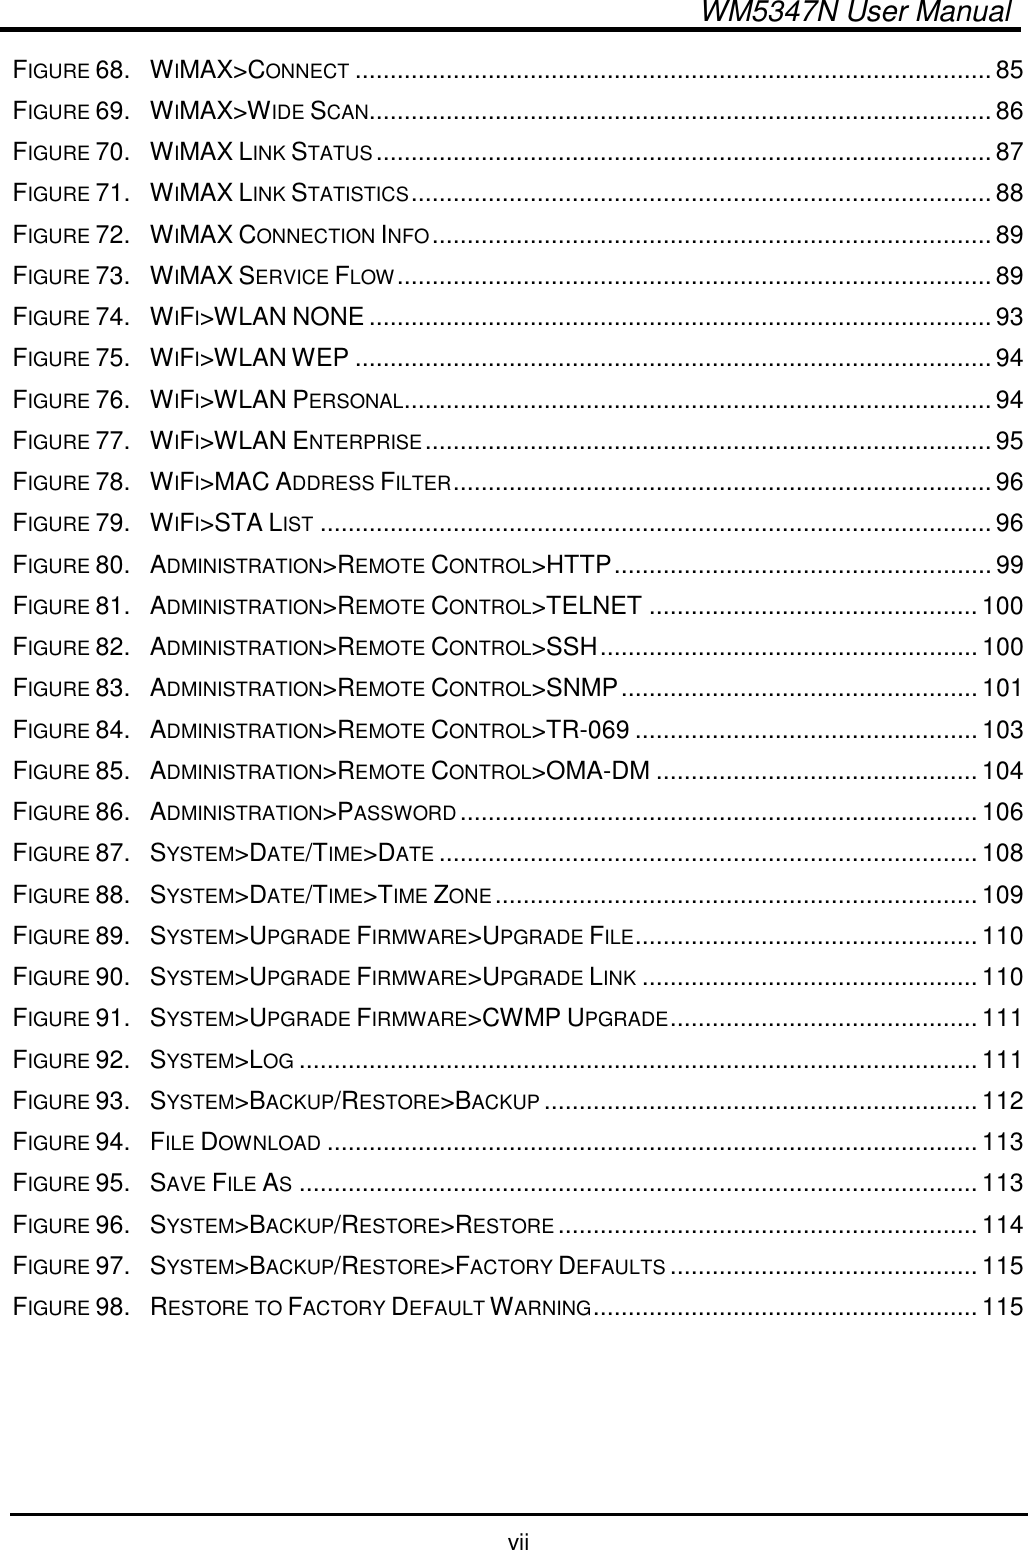   WM5347N User Manual  vii FIGURE 68. WIMAX&gt;CONNECT........................................................................................... 85 FIGURE 69. WIMAX&gt;WIDE SCAN......................................................................................... 86 FIGURE 70. WIMAX LINK STATUS........................................................................................ 87 FIGURE 71. WIMAX LINK STATISTICS................................................................................... 88 FIGURE 72. WIMAX CONNECTION INFO................................................................................ 89 FIGURE 73. WIMAX SERVICE FLOW..................................................................................... 89 FIGURE 74. WIFI&gt;WLAN NONE ......................................................................................... 93 FIGURE 75. WIFI&gt;WLAN WEP ........................................................................................... 94 FIGURE 76. WIFI&gt;WLAN PERSONAL.................................................................................... 94 FIGURE 77. WIFI&gt;WLAN ENTERPRISE................................................................................. 95 FIGURE 78. WIFI&gt;MAC ADDRESS FILTER............................................................................. 96 FIGURE 79. WIFI&gt;STA LIST................................................................................................ 96 FIGURE 80. ADMINISTRATION&gt;REMOTE CONTROL&gt;HTTP...................................................... 99 FIGURE 81. ADMINISTRATION&gt;REMOTE CONTROL&gt;TELNET ............................................... 100 FIGURE 82. ADMINISTRATION&gt;REMOTE CONTROL&gt;SSH...................................................... 100 FIGURE 83. ADMINISTRATION&gt;REMOTE CONTROL&gt;SNMP................................................... 101 FIGURE 84. ADMINISTRATION&gt;REMOTE CONTROL&gt;TR-069 ................................................. 103 FIGURE 85. ADMINISTRATION&gt;REMOTE CONTROL&gt;OMA-DM .............................................. 104 FIGURE 86. ADMINISTRATION&gt;PASSWORD.......................................................................... 106 FIGURE 87. SYSTEM&gt;DATE/TIME&gt;DATE............................................................................. 108 FIGURE 88. SYSTEM&gt;DATE/TIME&gt;TIME ZONE..................................................................... 109 FIGURE 89. SYSTEM&gt;UPGRADE FIRMWARE&gt;UPGRADE FILE................................................. 110 FIGURE 90. SYSTEM&gt;UPGRADE FIRMWARE&gt;UPGRADE LINK................................................ 110 FIGURE 91. SYSTEM&gt;UPGRADE FIRMWARE&gt;CWMP UPGRADE............................................ 111 FIGURE 92. SYSTEM&gt;LOG................................................................................................. 111 FIGURE 93. SYSTEM&gt;BACKUP/RESTORE&gt;BACKUP.............................................................. 112 FIGURE 94. FILE DOWNLOAD............................................................................................. 113 FIGURE 95. SAVE FILE AS................................................................................................. 113 FIGURE 96. SYSTEM&gt;BACKUP/RESTORE&gt;RESTORE............................................................ 114 FIGURE 97. SYSTEM&gt;BACKUP/RESTORE&gt;FACTORY DEFAULTS............................................ 115 FIGURE 98. RESTORE TO FACTORY DEFAULT WARNING....................................................... 115   